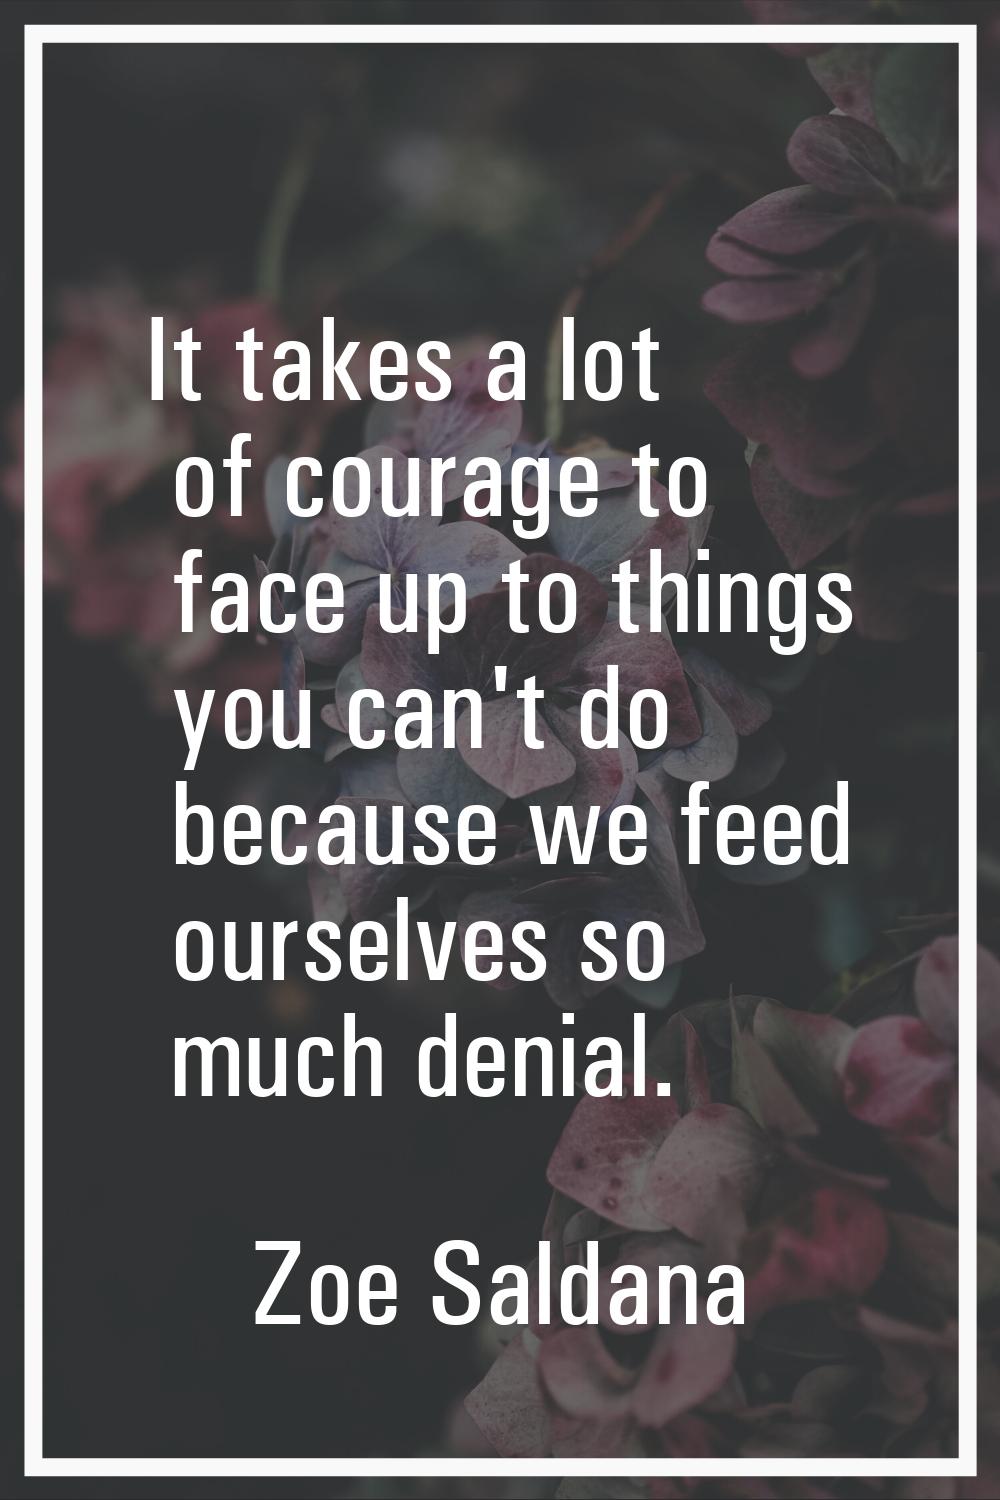 It takes a lot of courage to face up to things you can't do because we feed ourselves so much denia